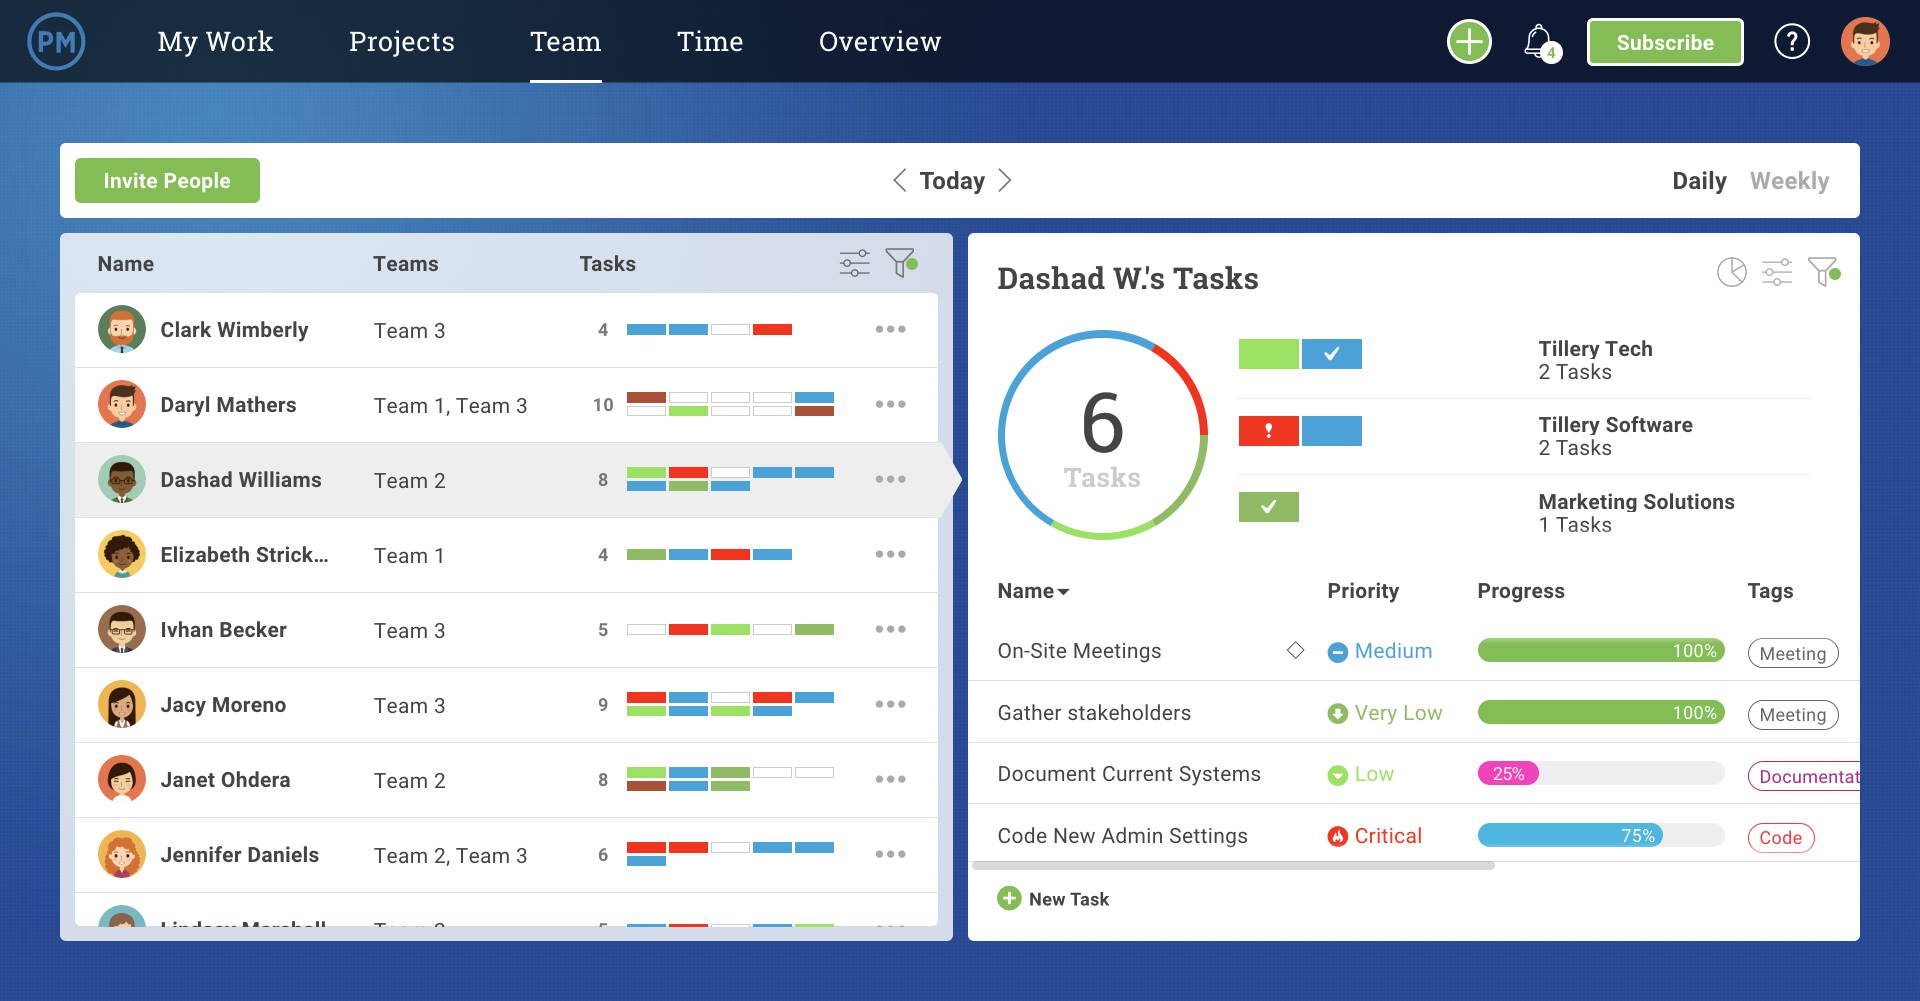 A screenshot of the Teams page in ProjectManager, which shows the status of each of your team members